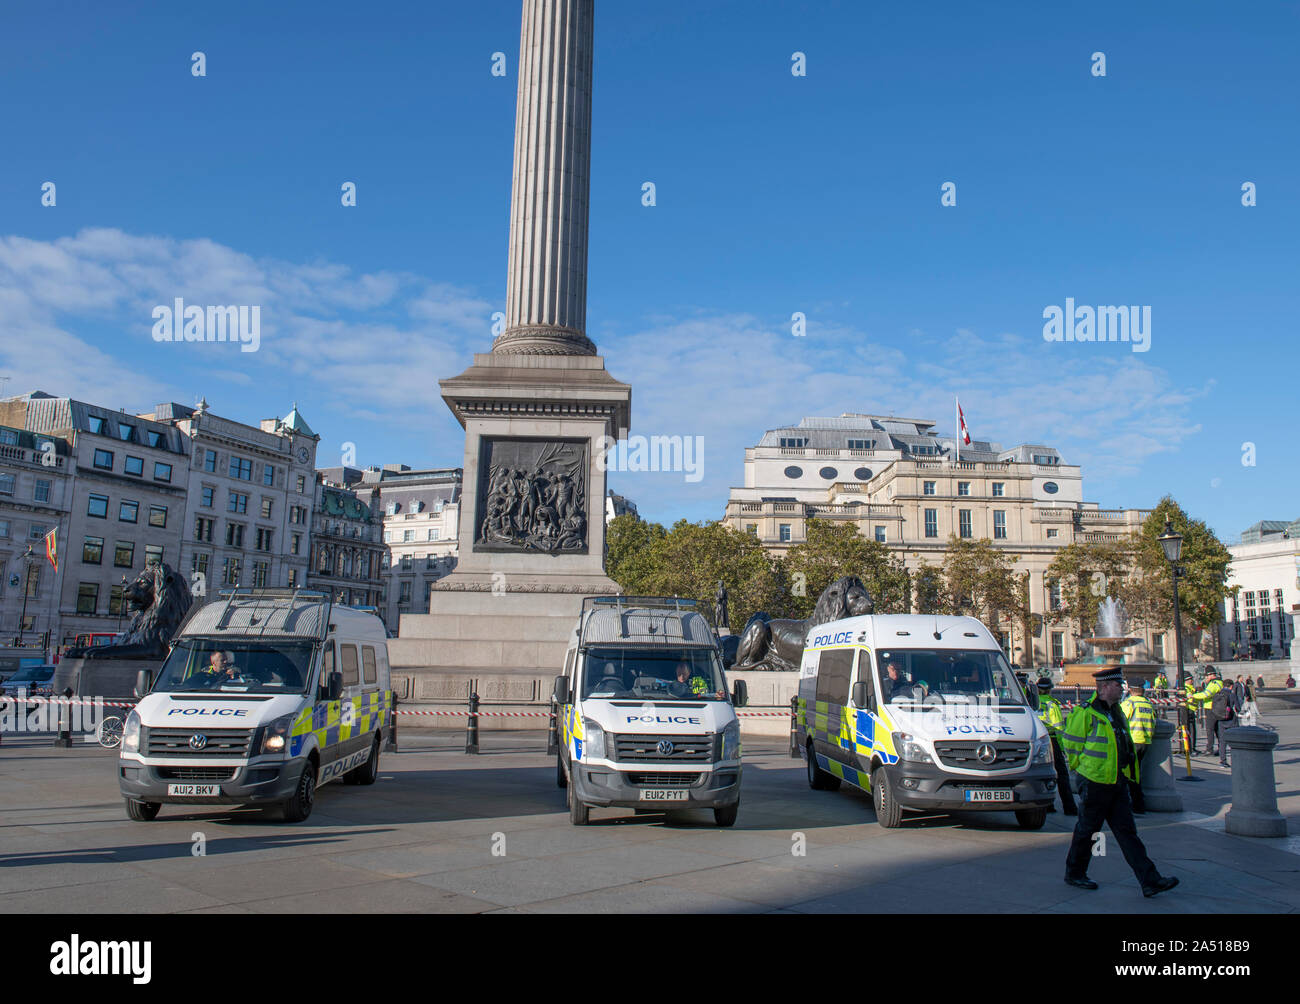 Trafalgar Square, London, UK. 17th October 2019. Large early morning police presence in Trafalgar Square after Extinction Rebellion climate change protesters were stopped from gathering in the area. Vans parked from Essex Police, Kent Police and Norfolk Constabulary. Credit: Malcolm Park/Alamy Live News. Stock Photo